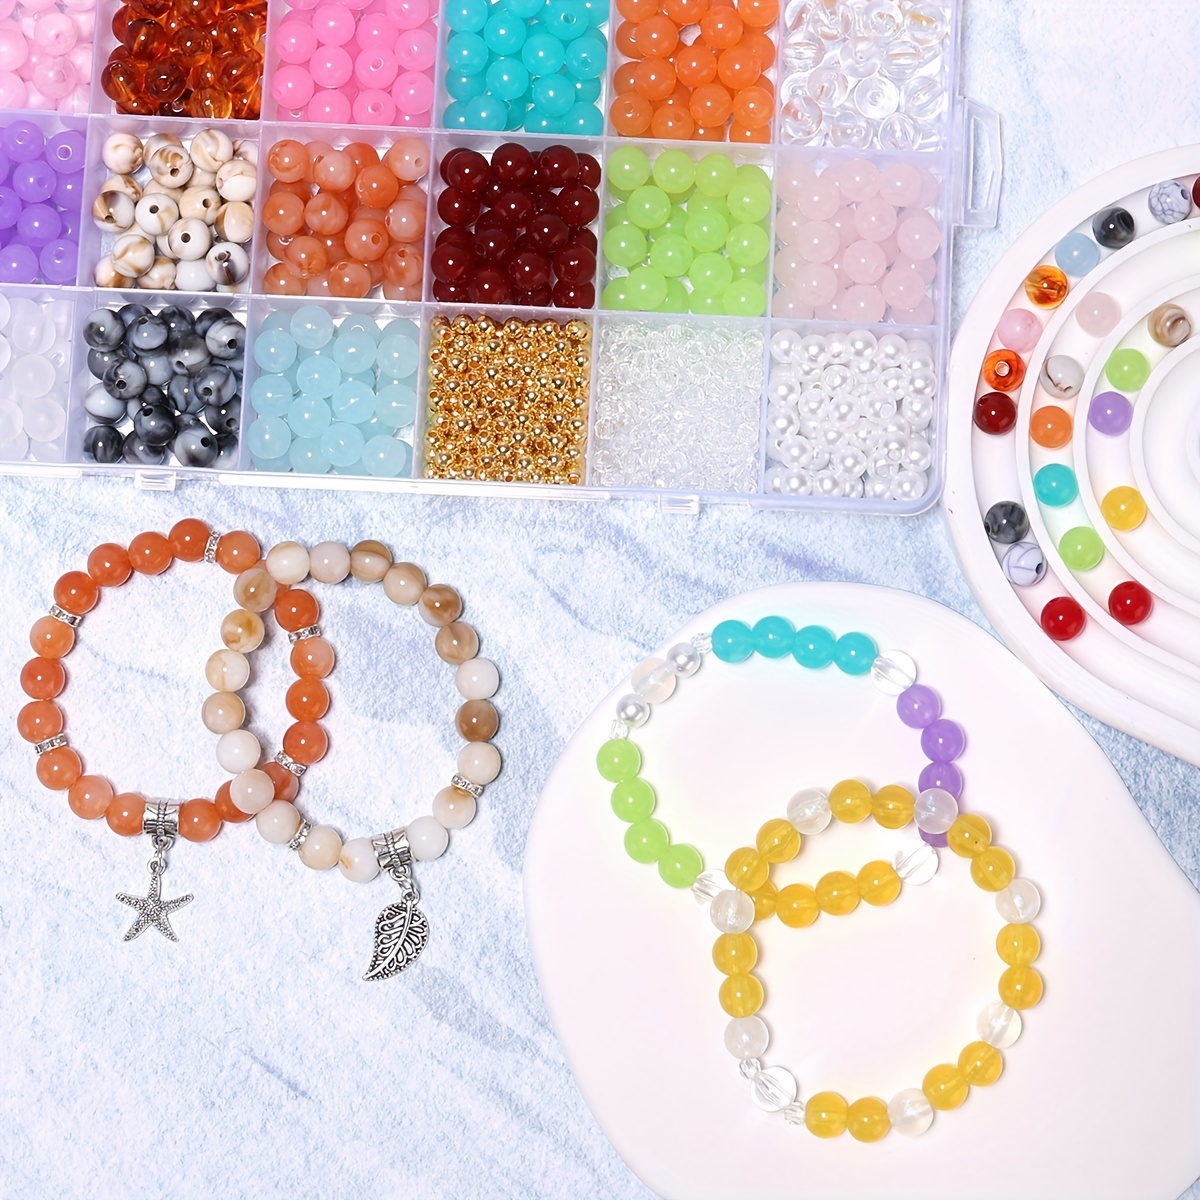  Jewelry Making Kit For Adults & Teens - Girls DIY